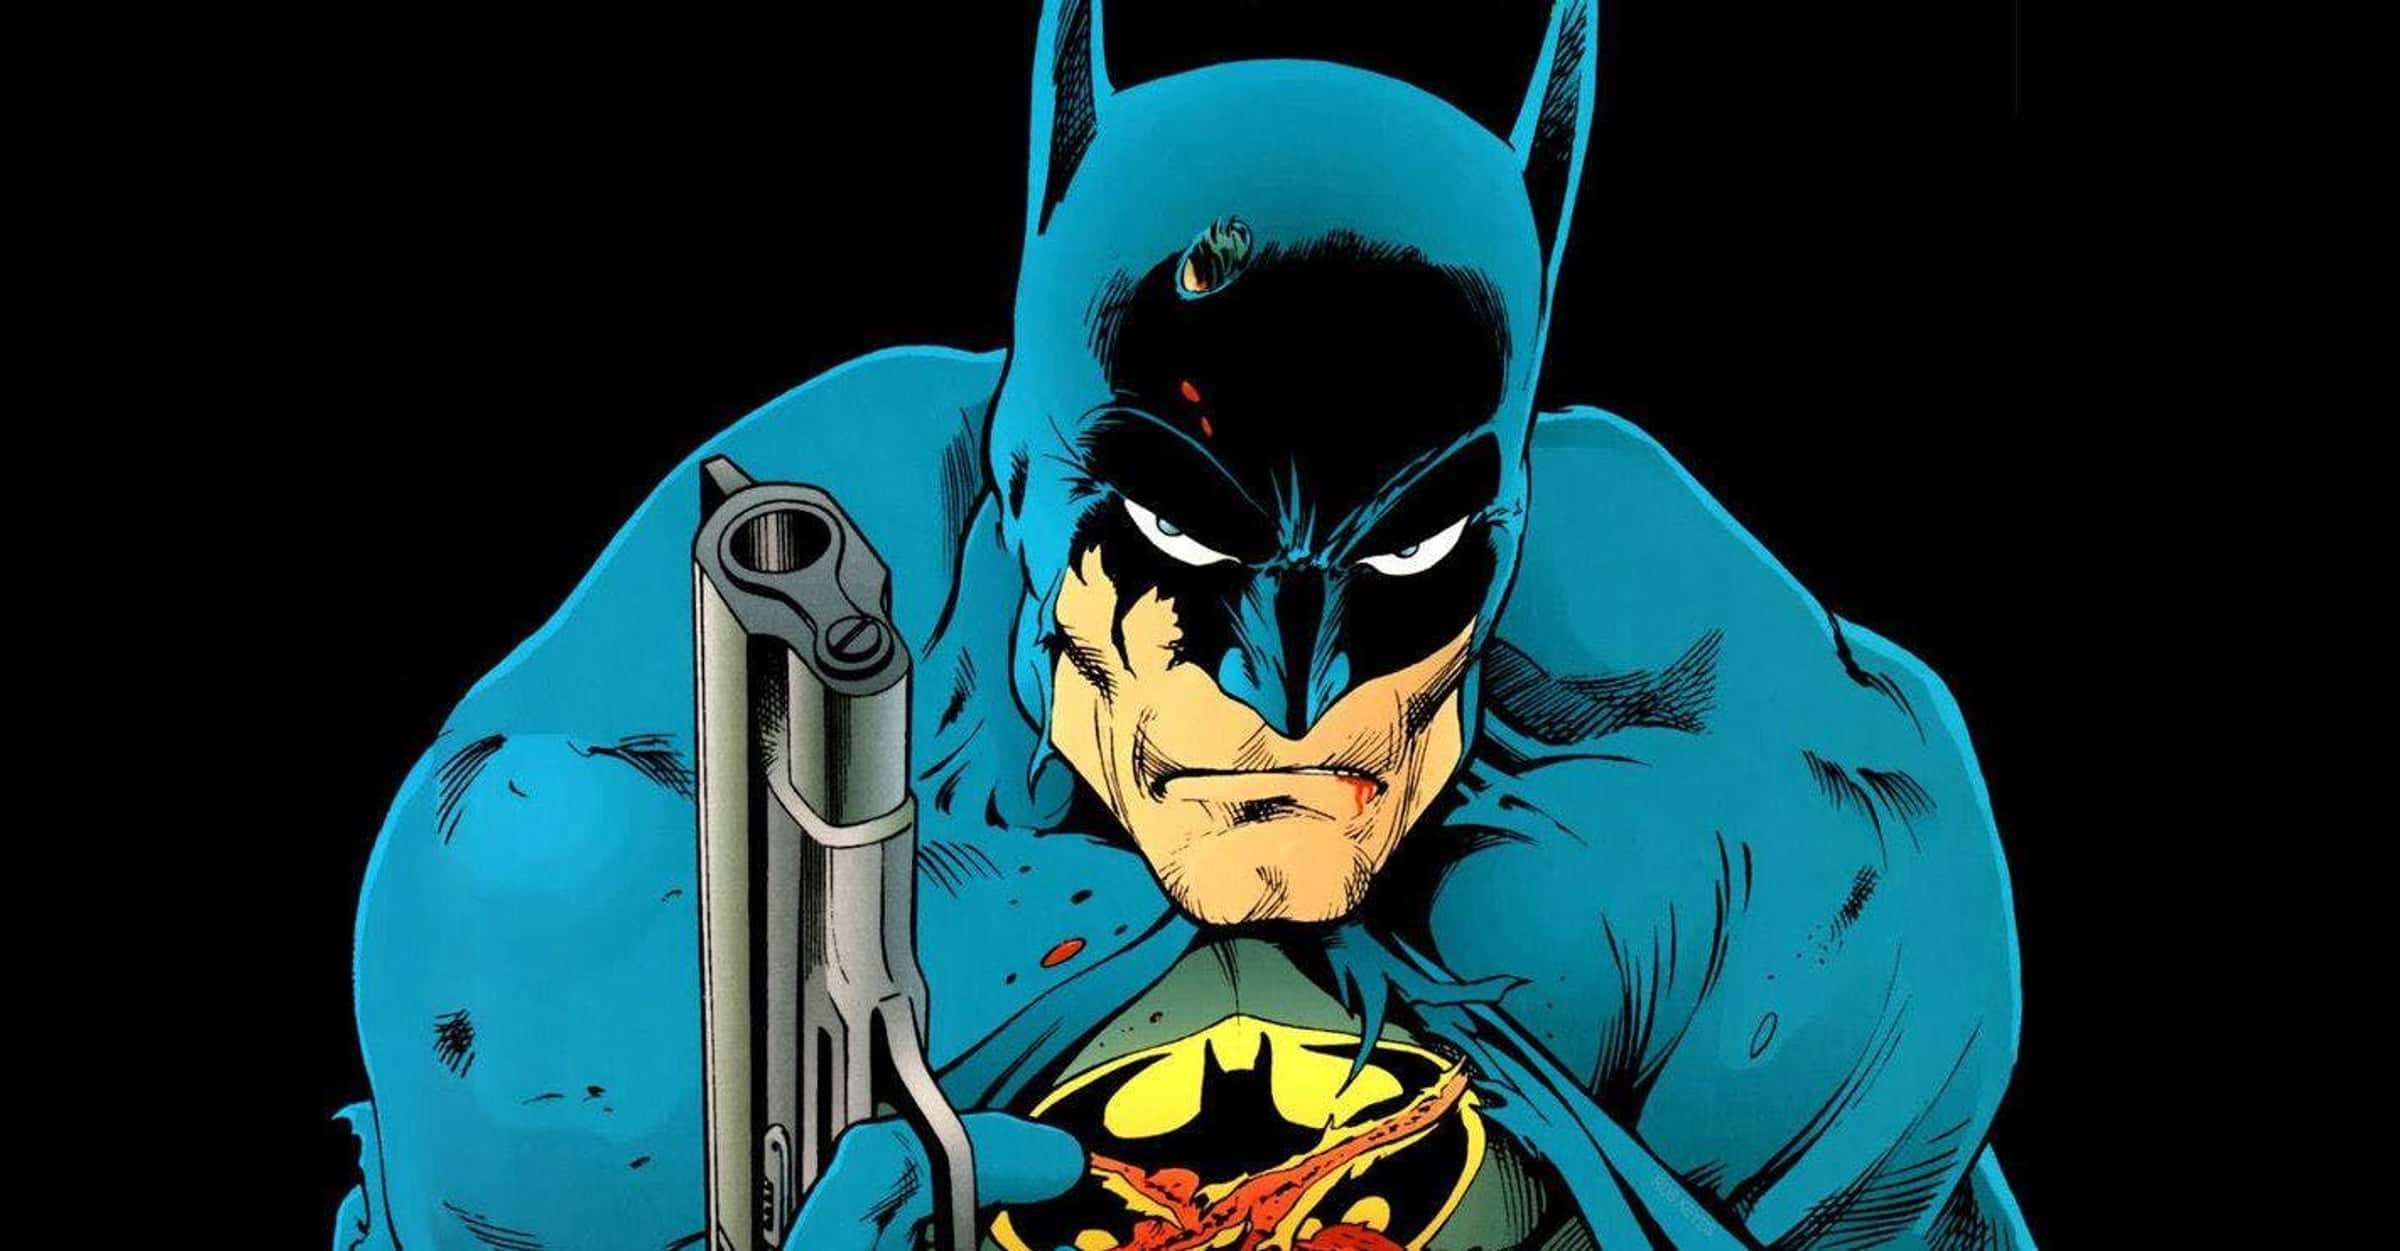 15 Brutal Times When Batman Actually Killed People